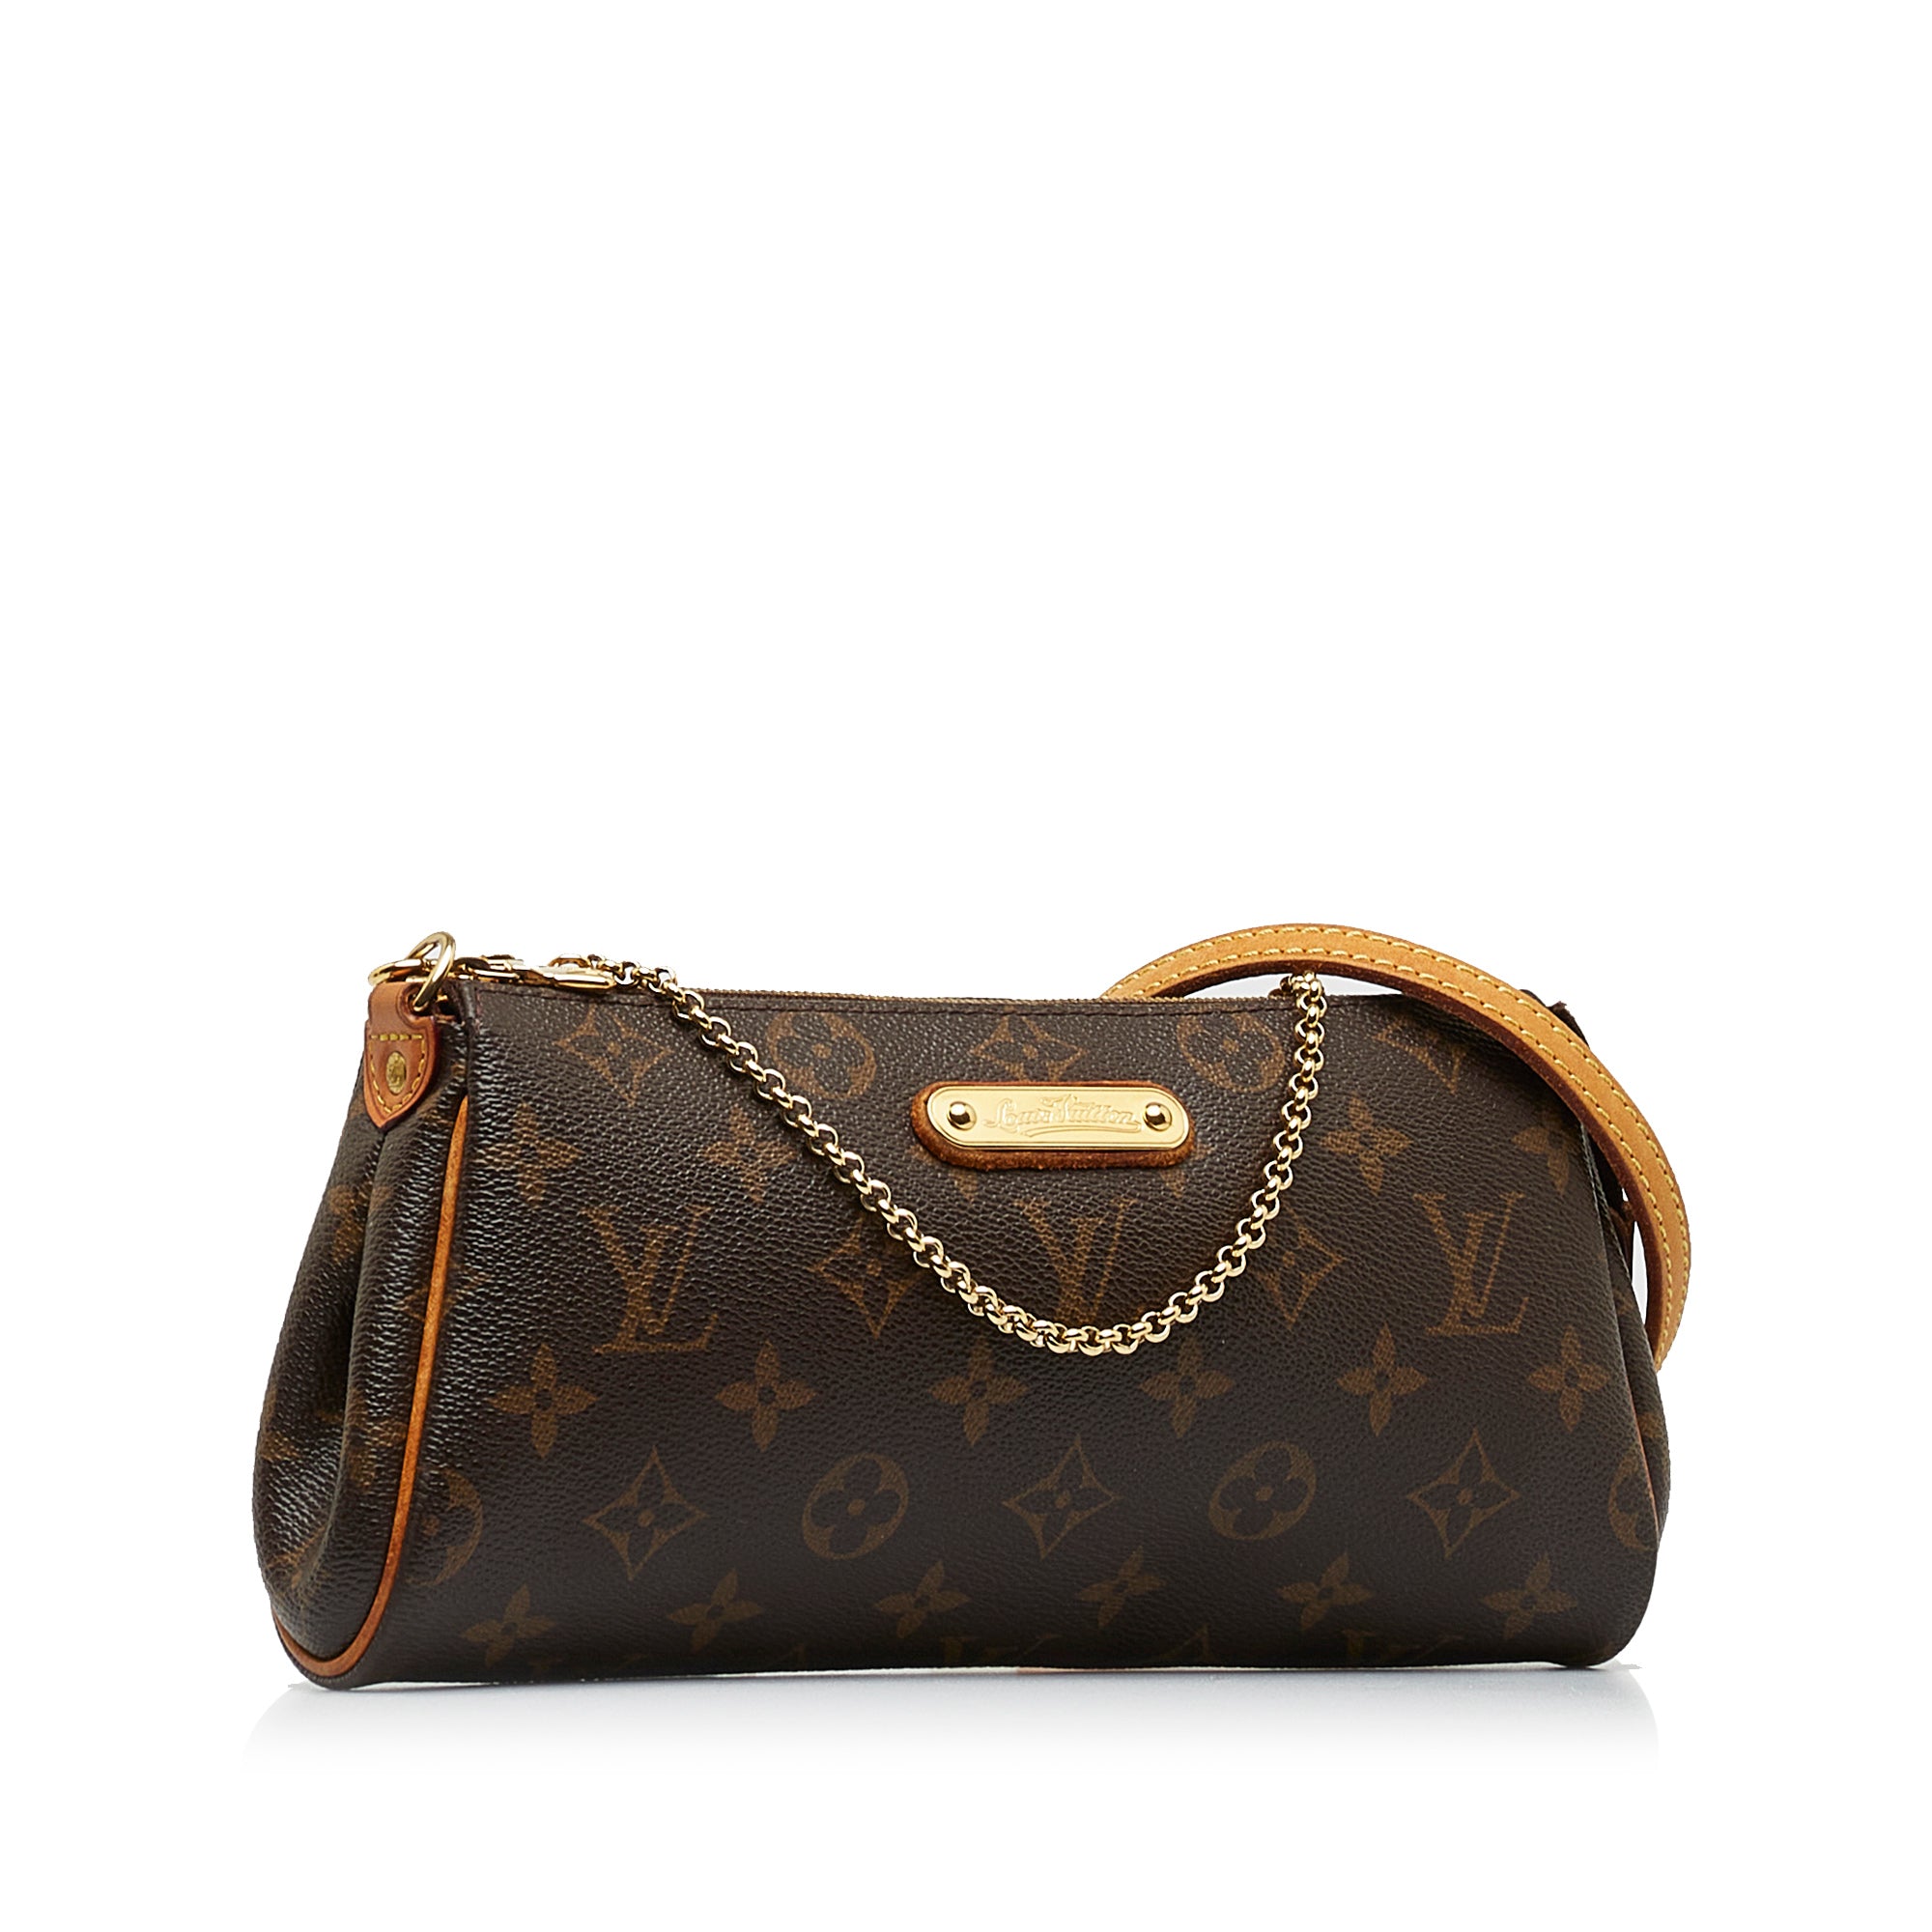 Louis Vuitton - Authenticated Eva Clutch Bag - Leather Brown for Women, Never Worn, with Tag